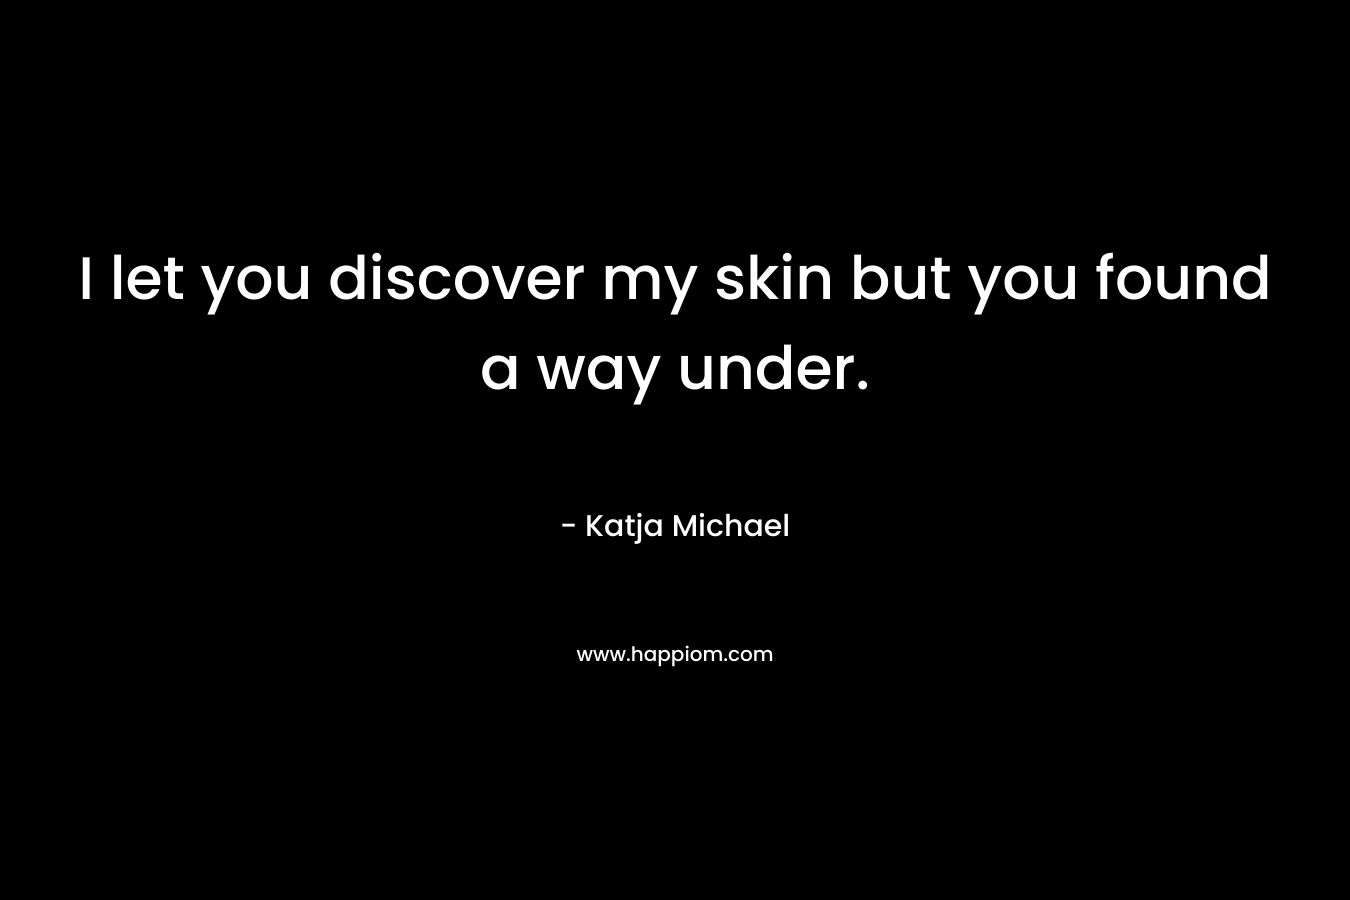 I let you discover my skin but you found a way under.